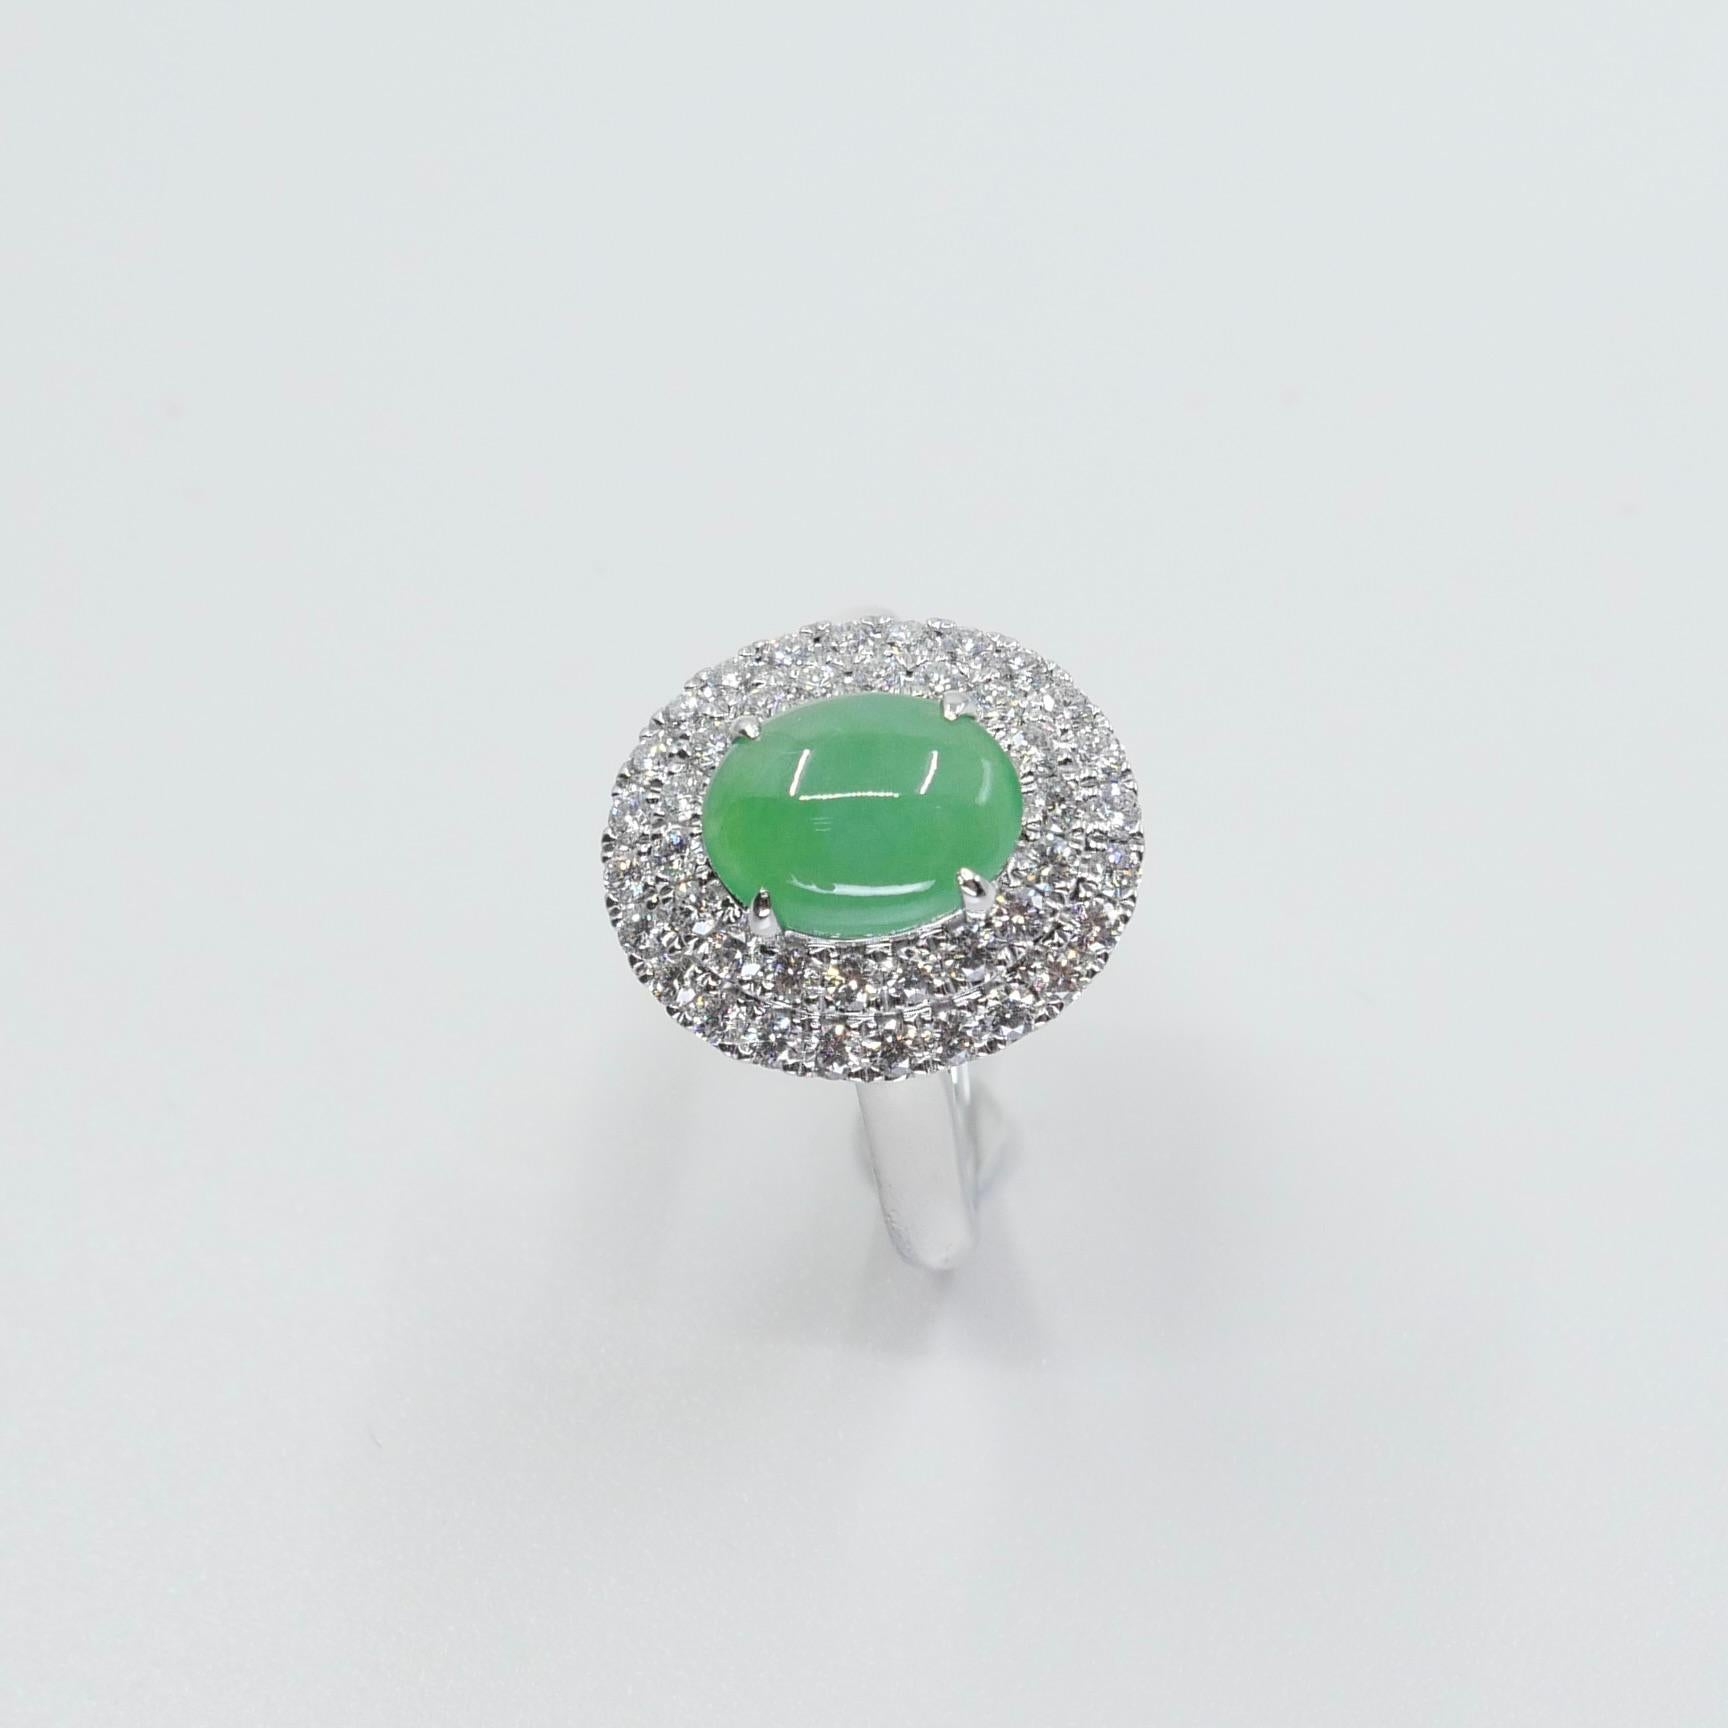 Certified 1.59 Carat Natural Jade & Diamond Cocktail Ring, Apple Green Color For Sale 4